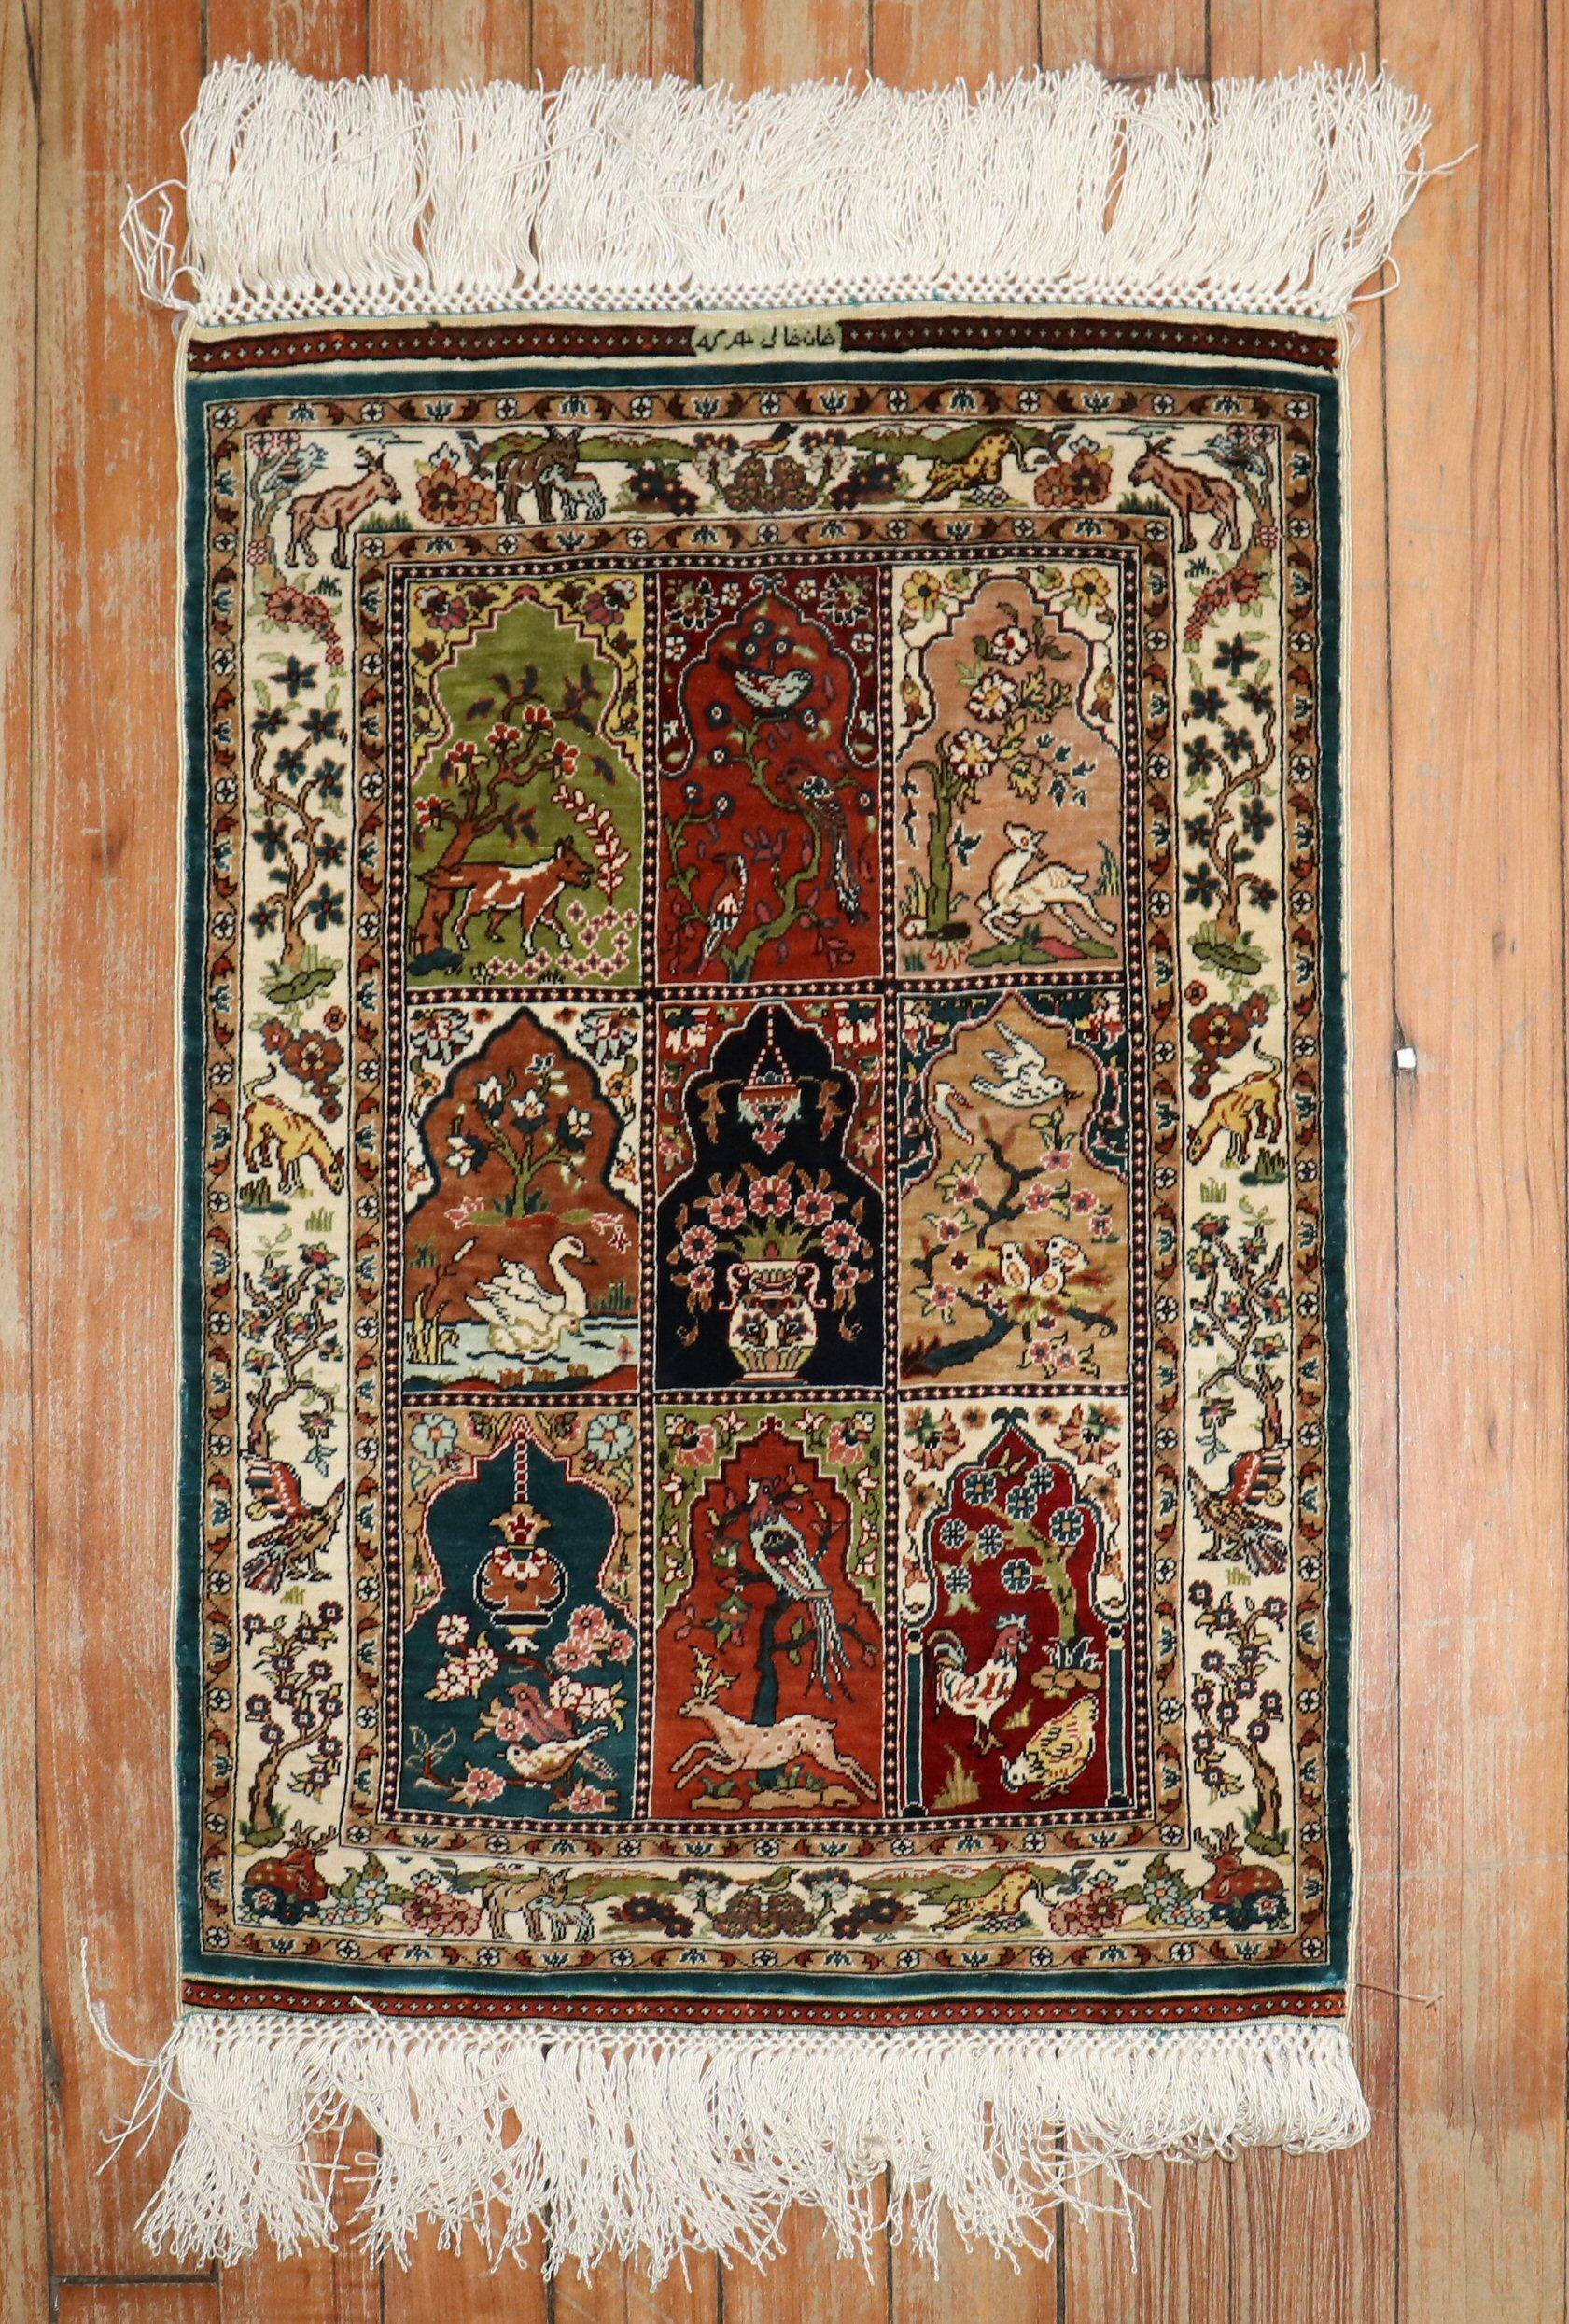 3rd quarter of the 20th century Fine Turkish silk one-of-a-kind Herekeh rug with a beautiful pictorial animal garden design 

Measures: 1'4'' x 1'11'.